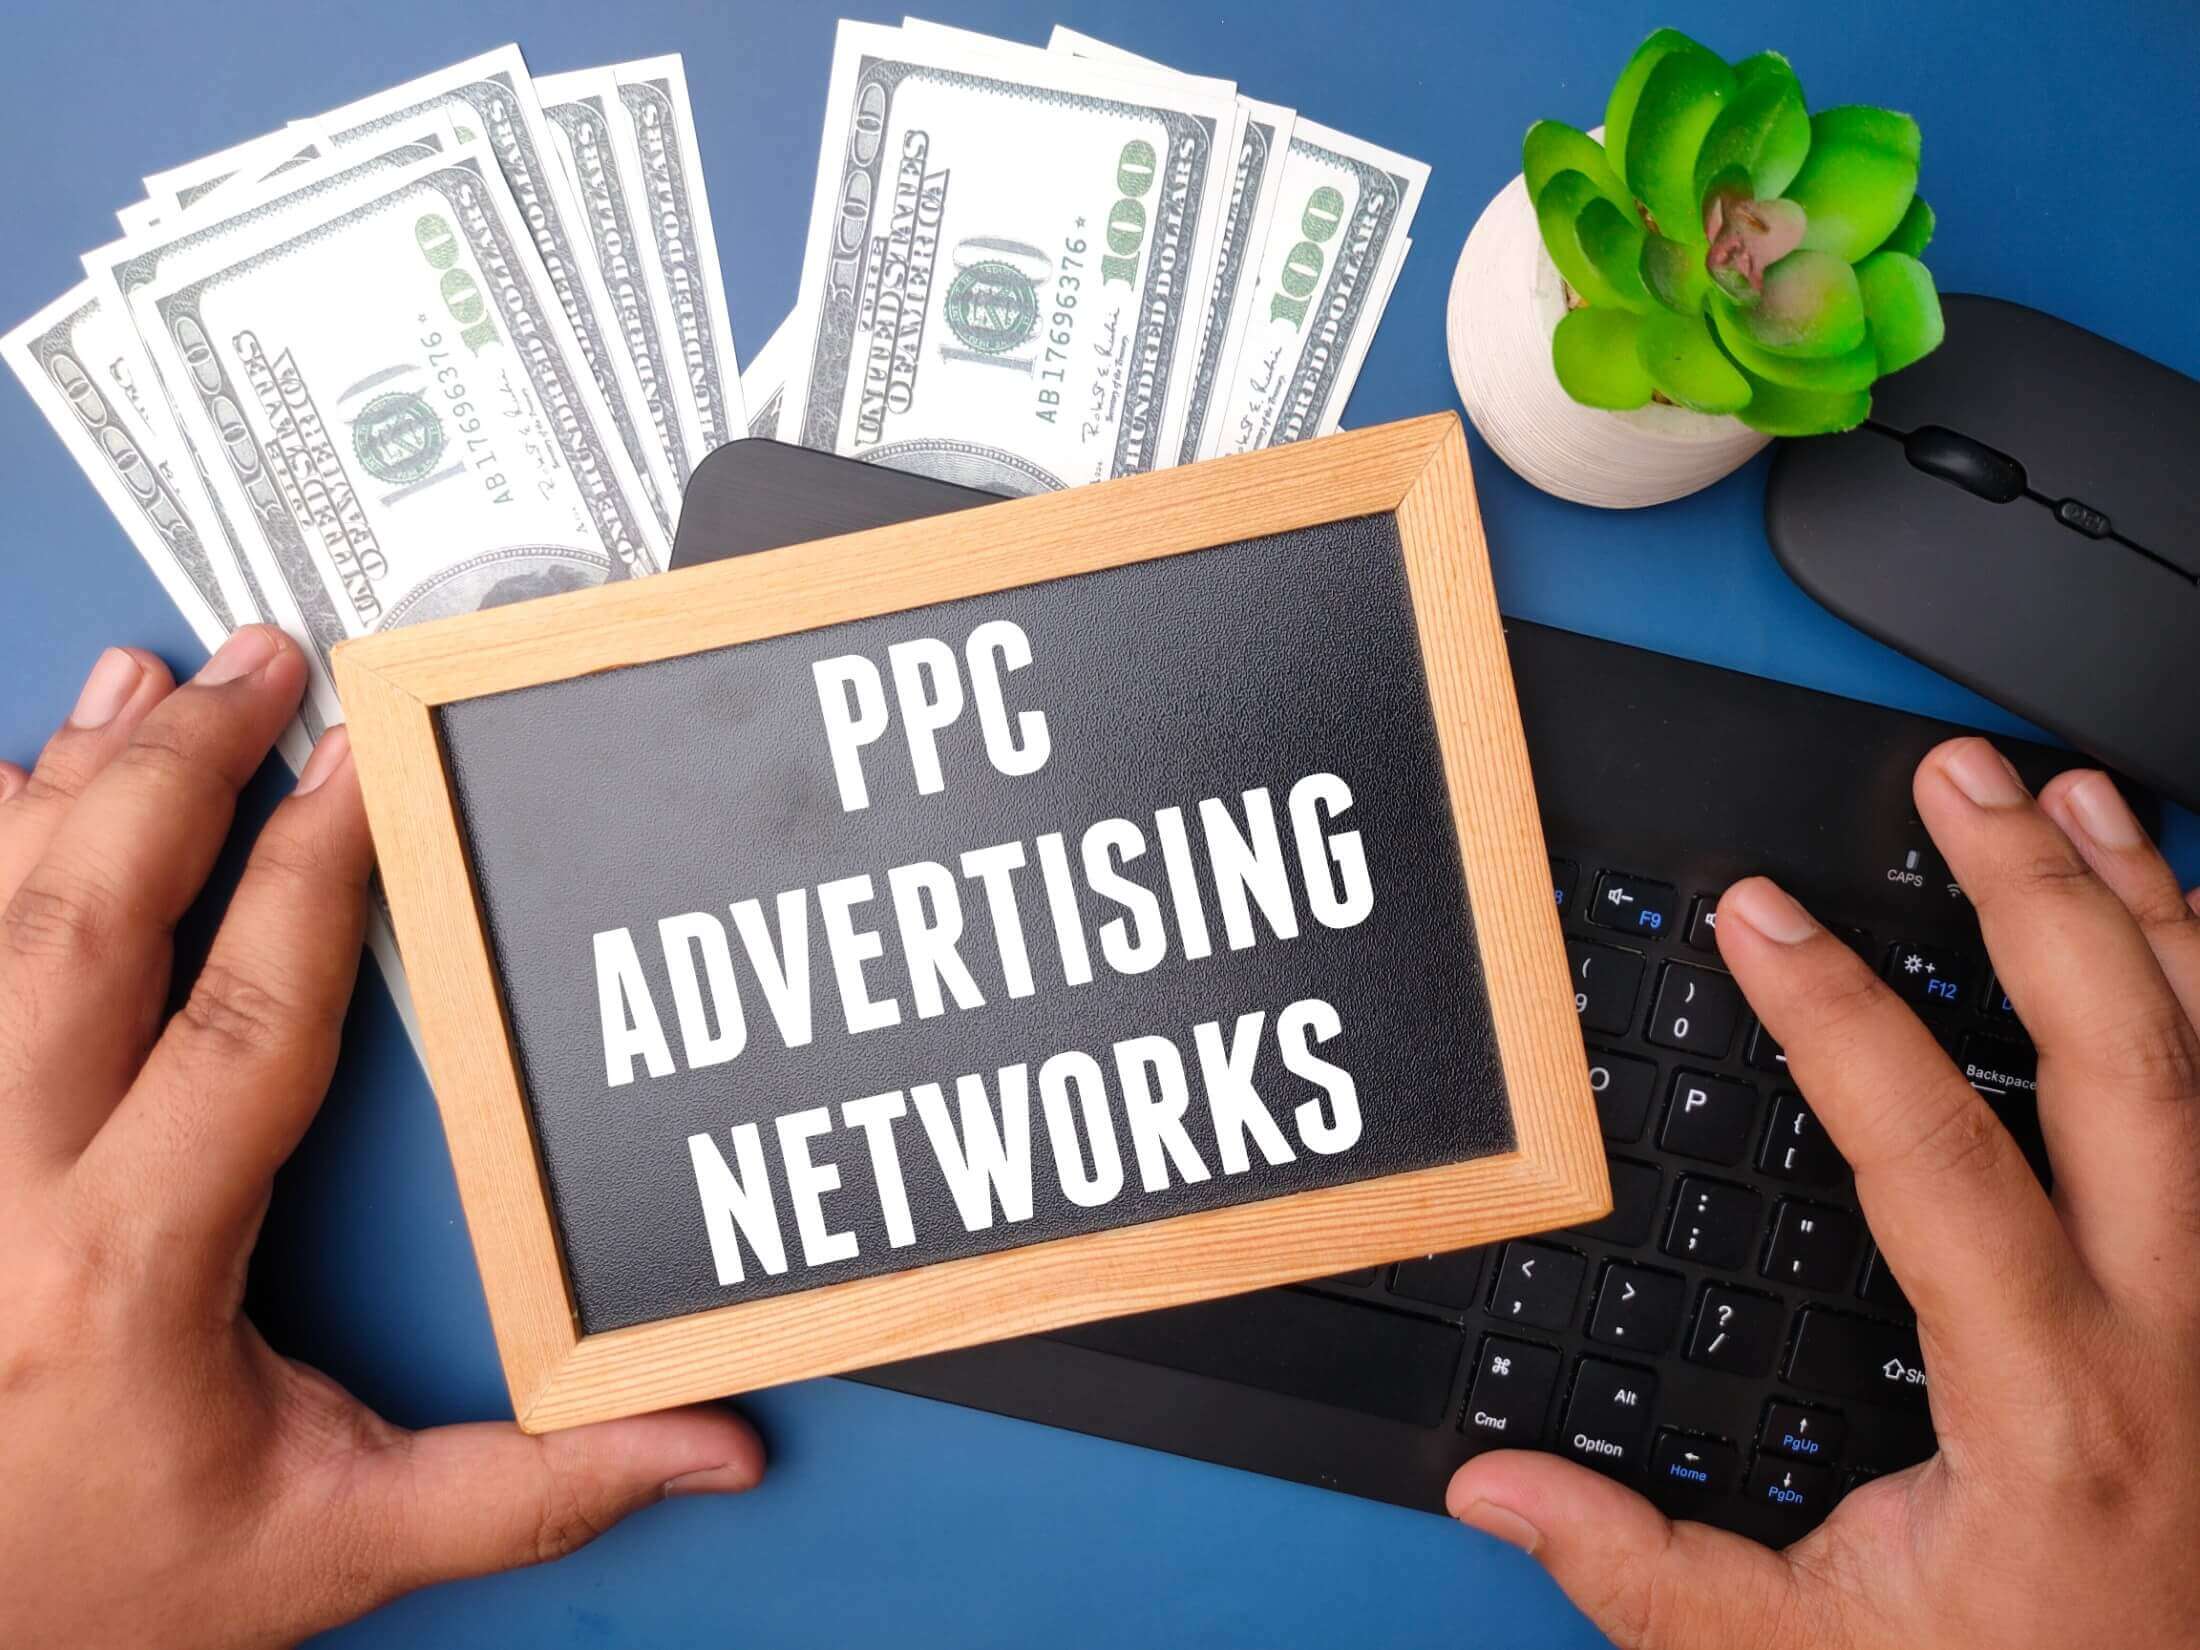 An image of a black-framed board with the words "PPC ADVERTISING NETWORKS" written on it, placed next to a wireless keyboard and a stack of banknotes, indicating a financial theme related to pay-per-click advertising.